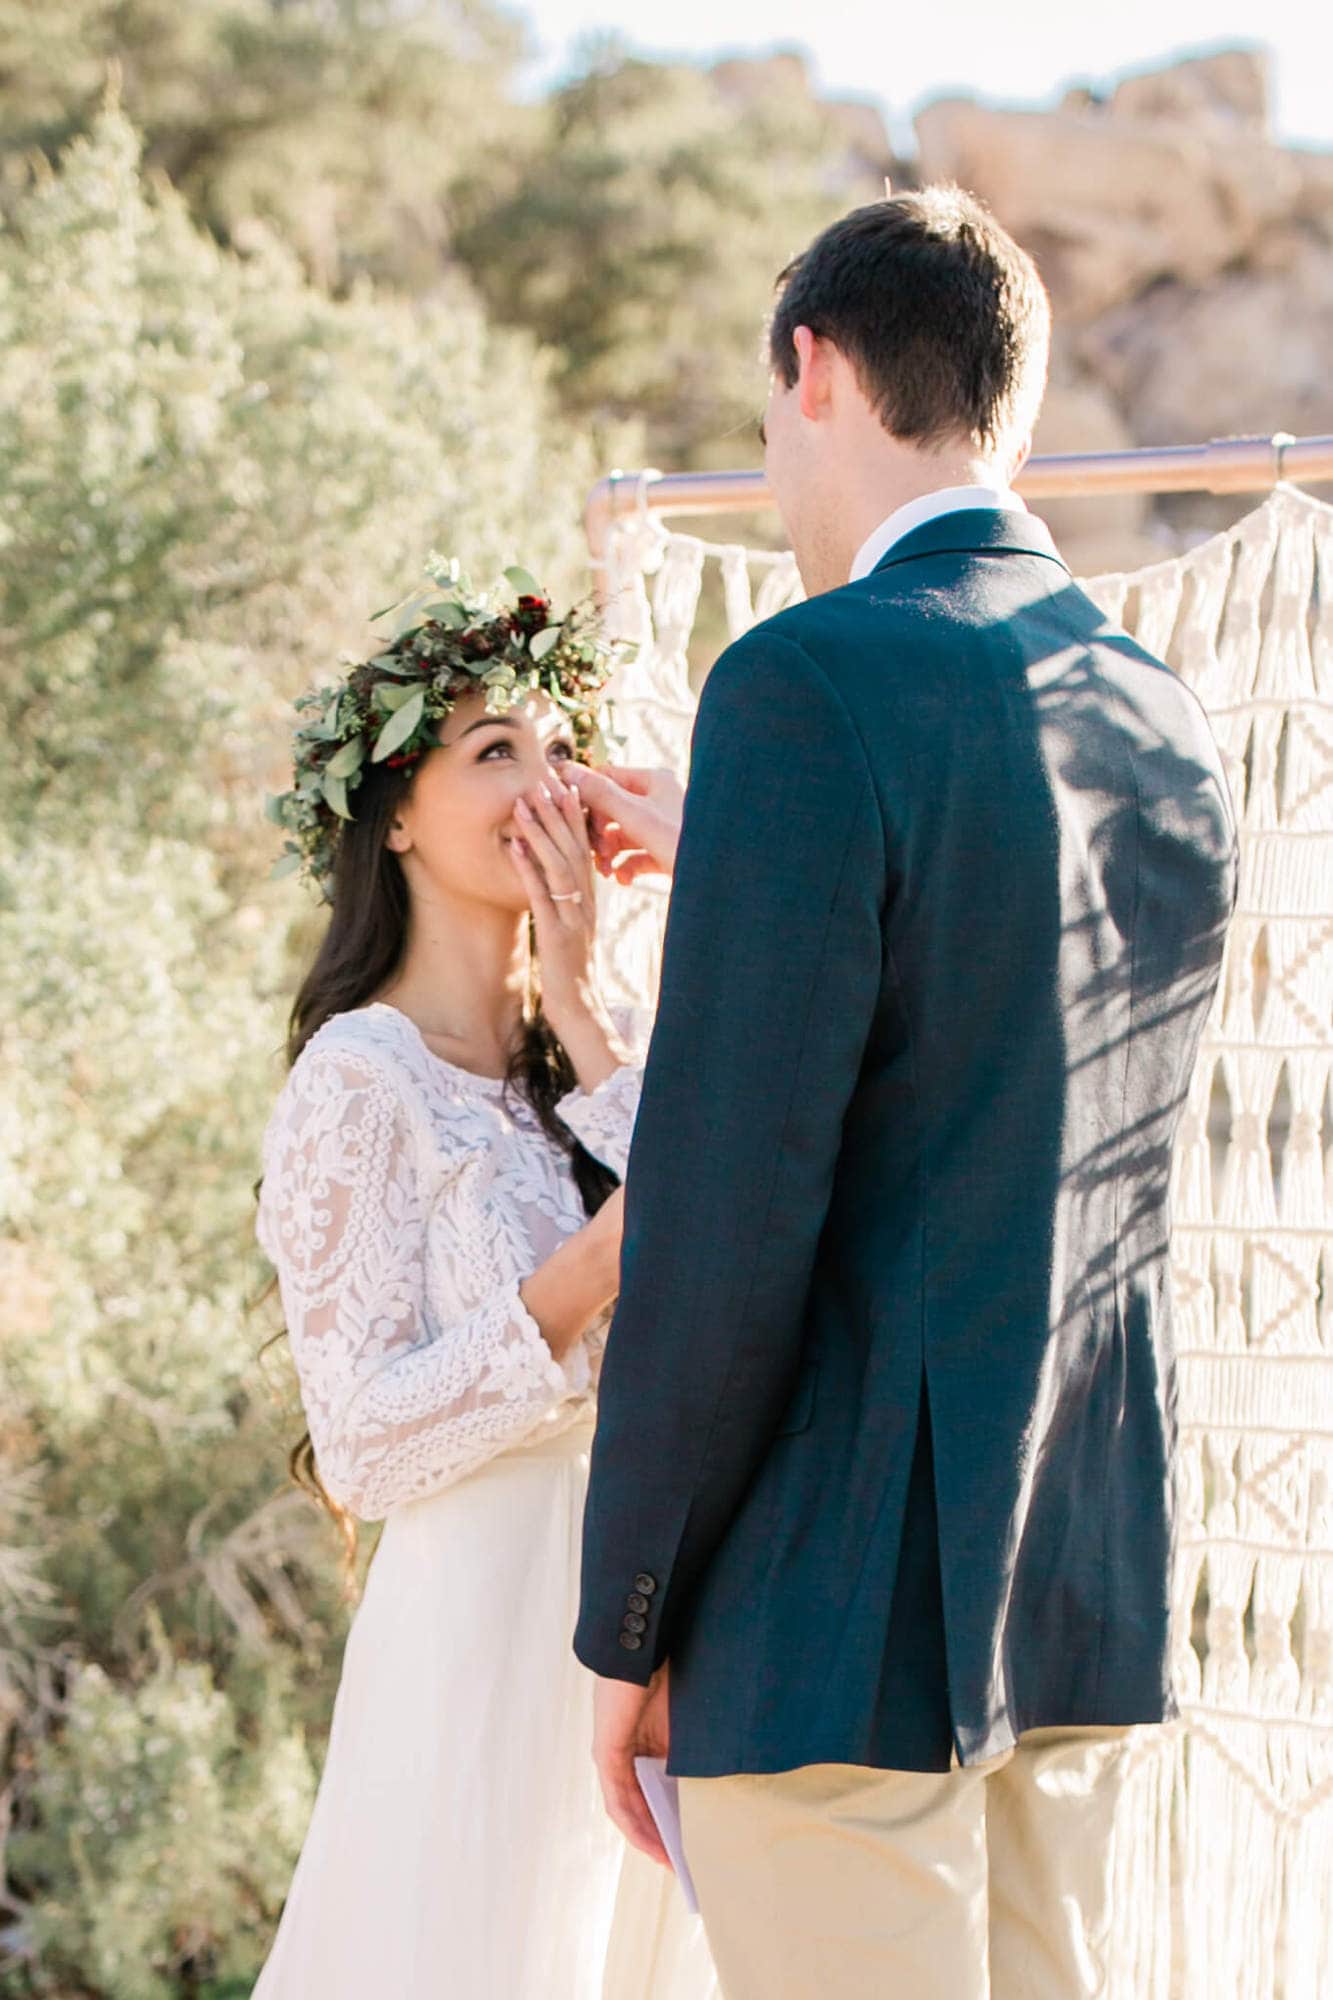 The groom wipes away his bride's tears tears during his joshua tree elopement.